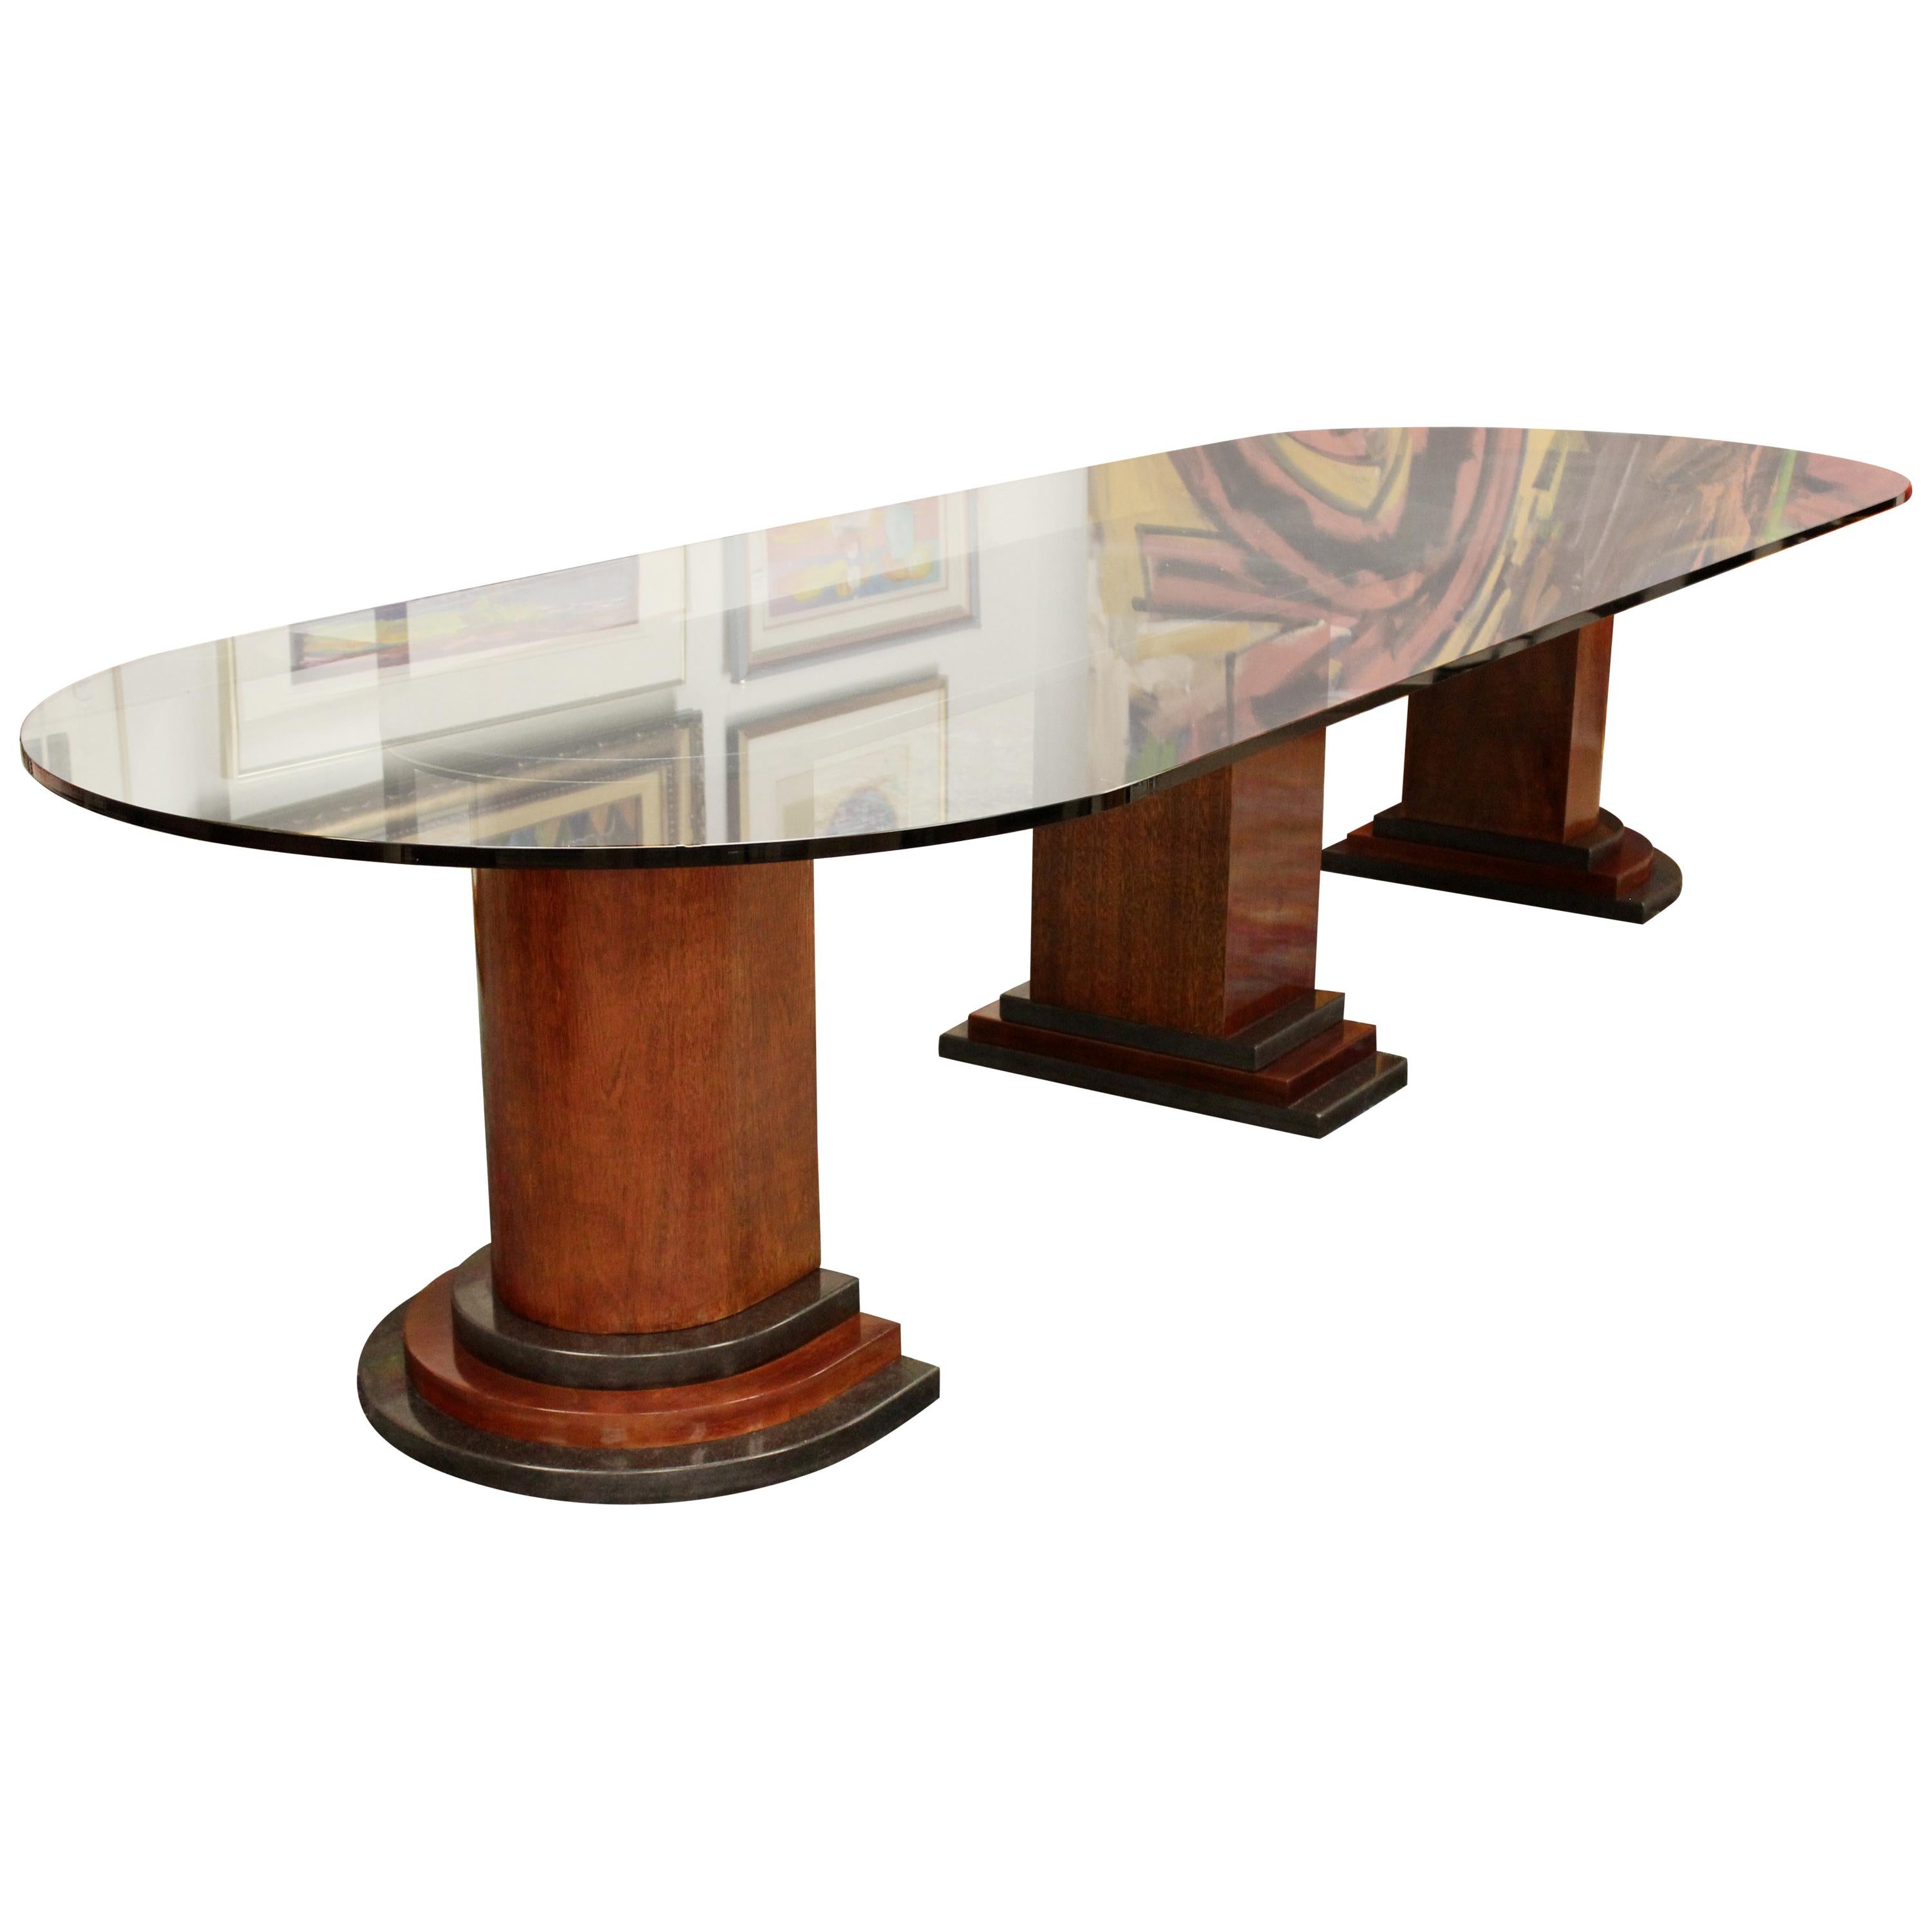 Contemporary Modern Monumental Rosewood Granite Glass Dining Conference Table